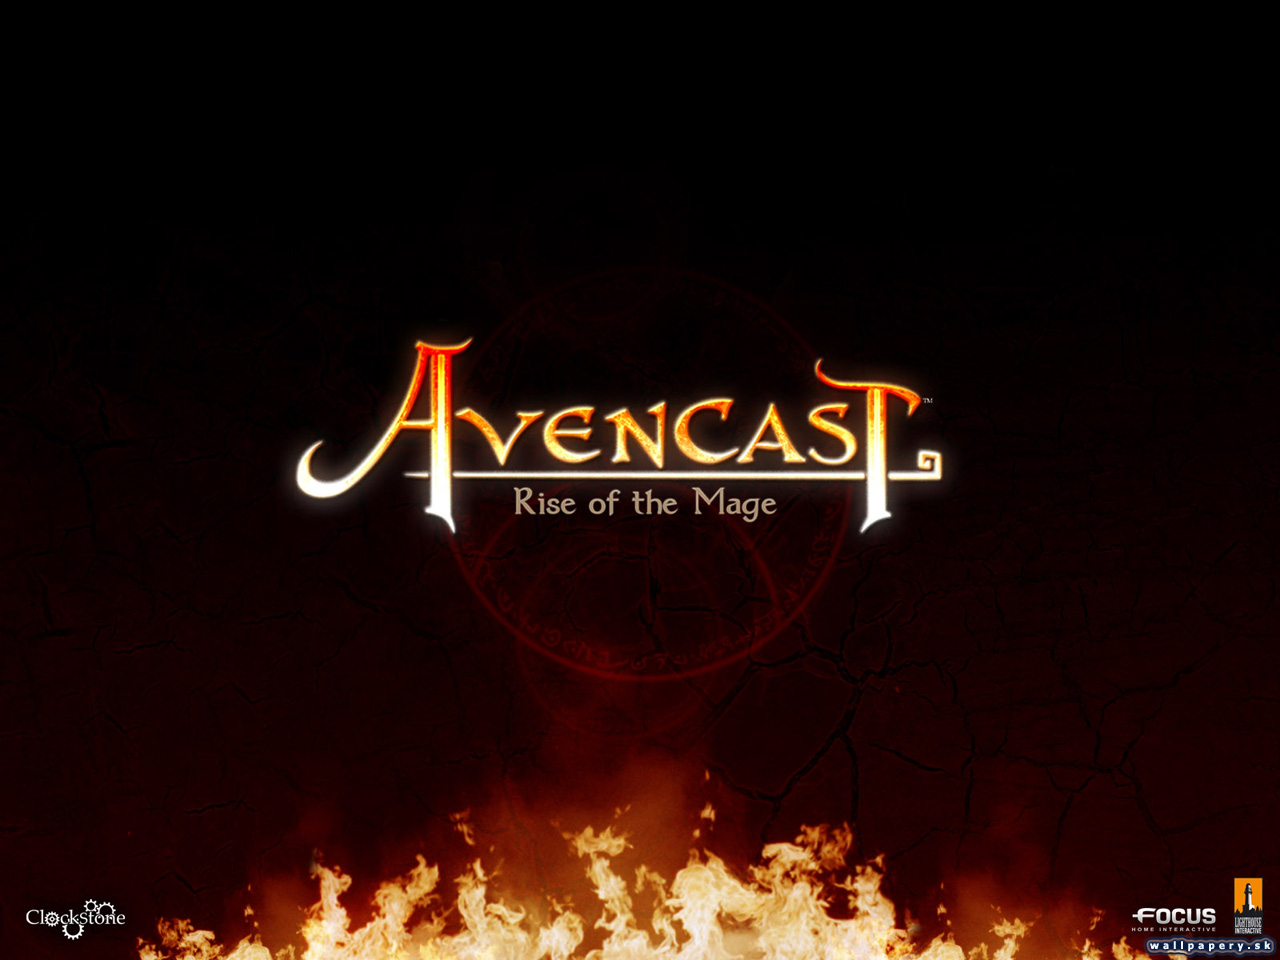 Avencast: Rise of the Mage - wallpaper 2